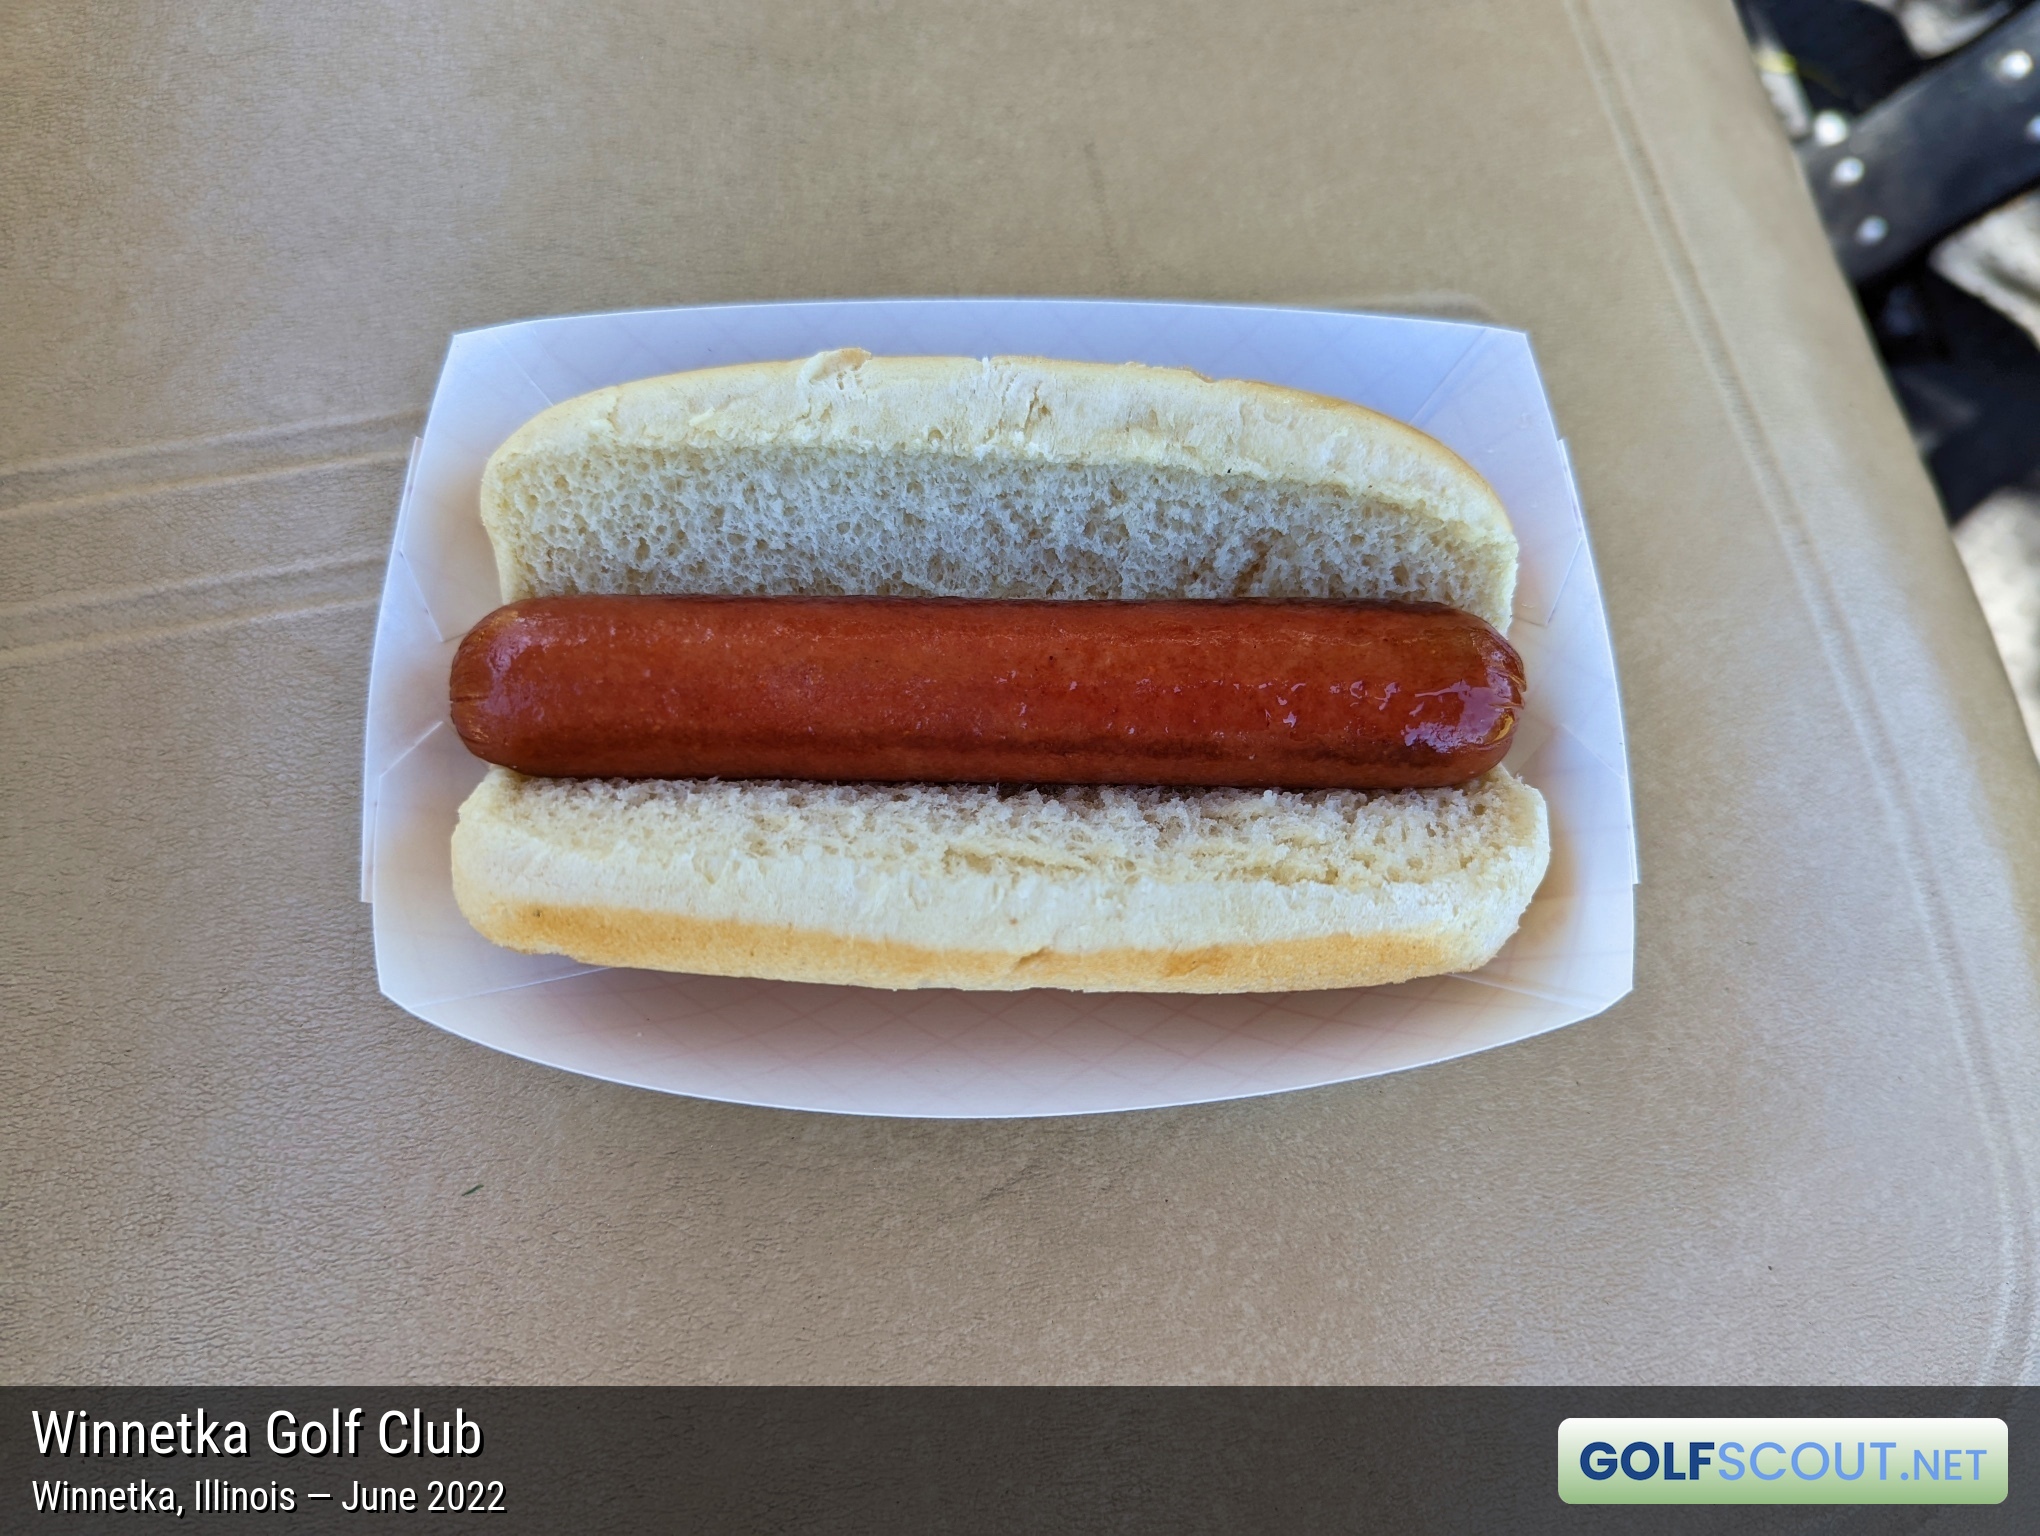 Photo of the food and dining at Winnetka Golf Club in Winnetka, Illinois. 